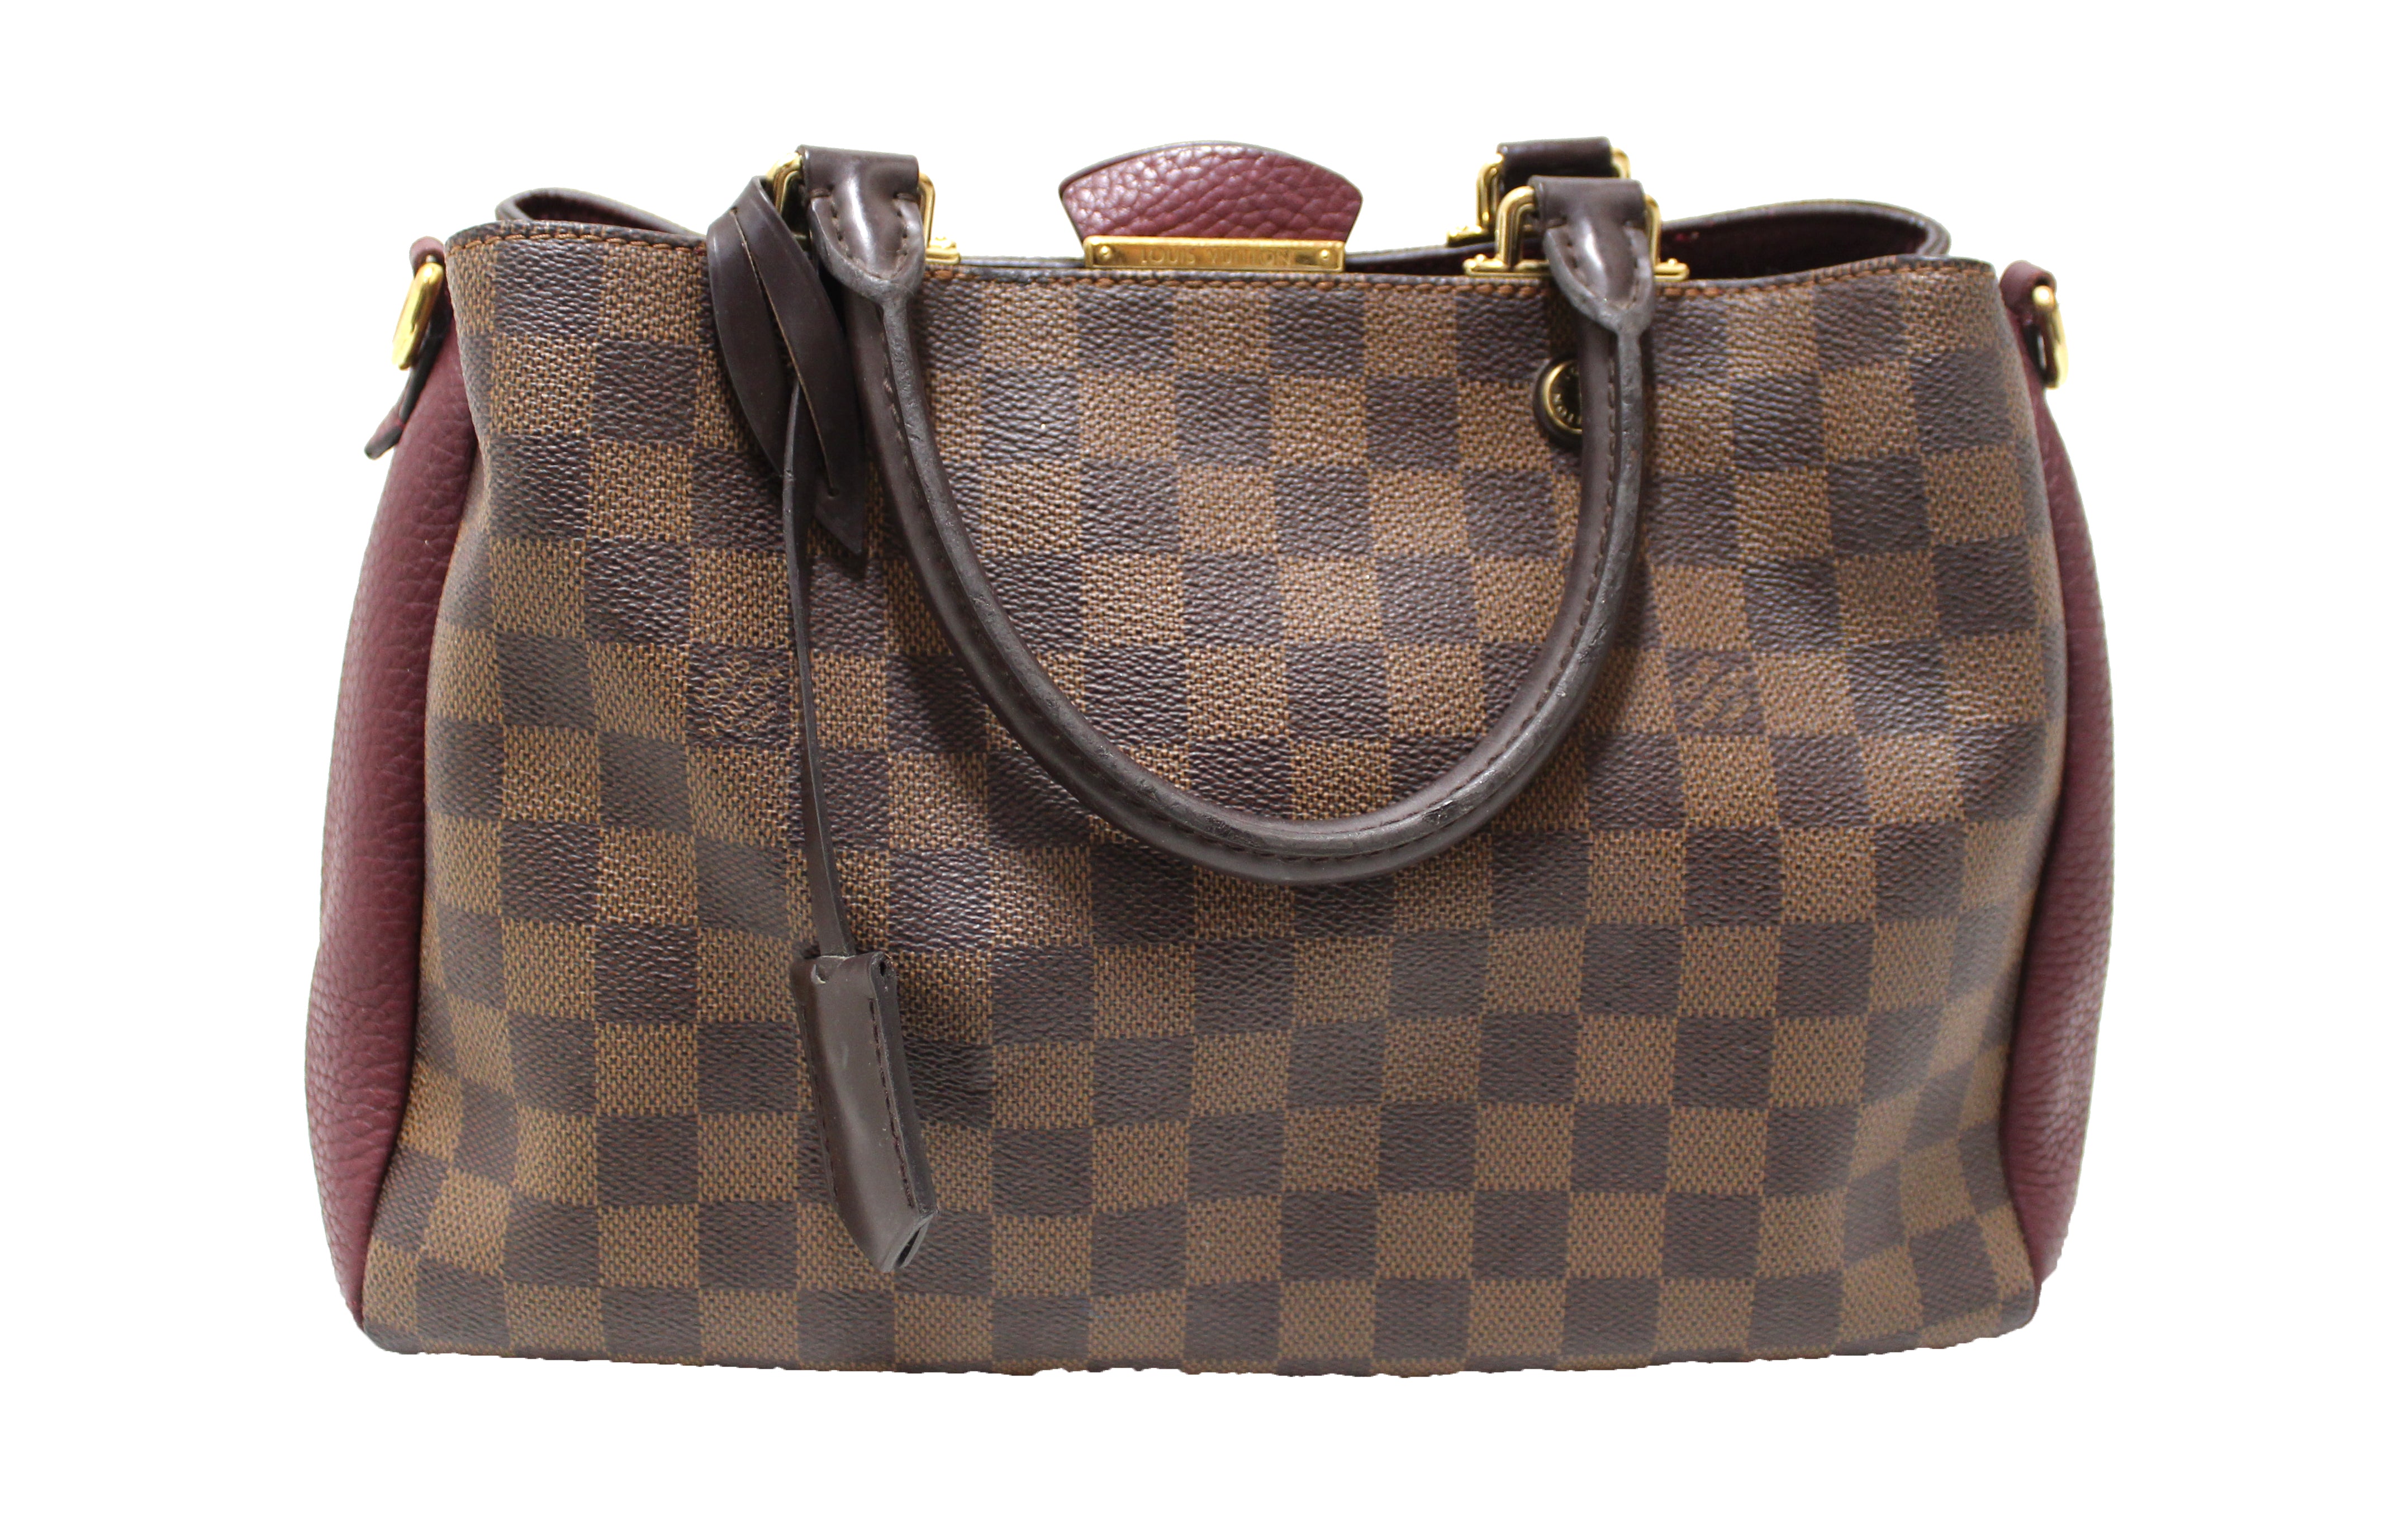 Authentic Louis Vuitton Damier Ebene Canvas with Burgandy Leather Brittany Bag